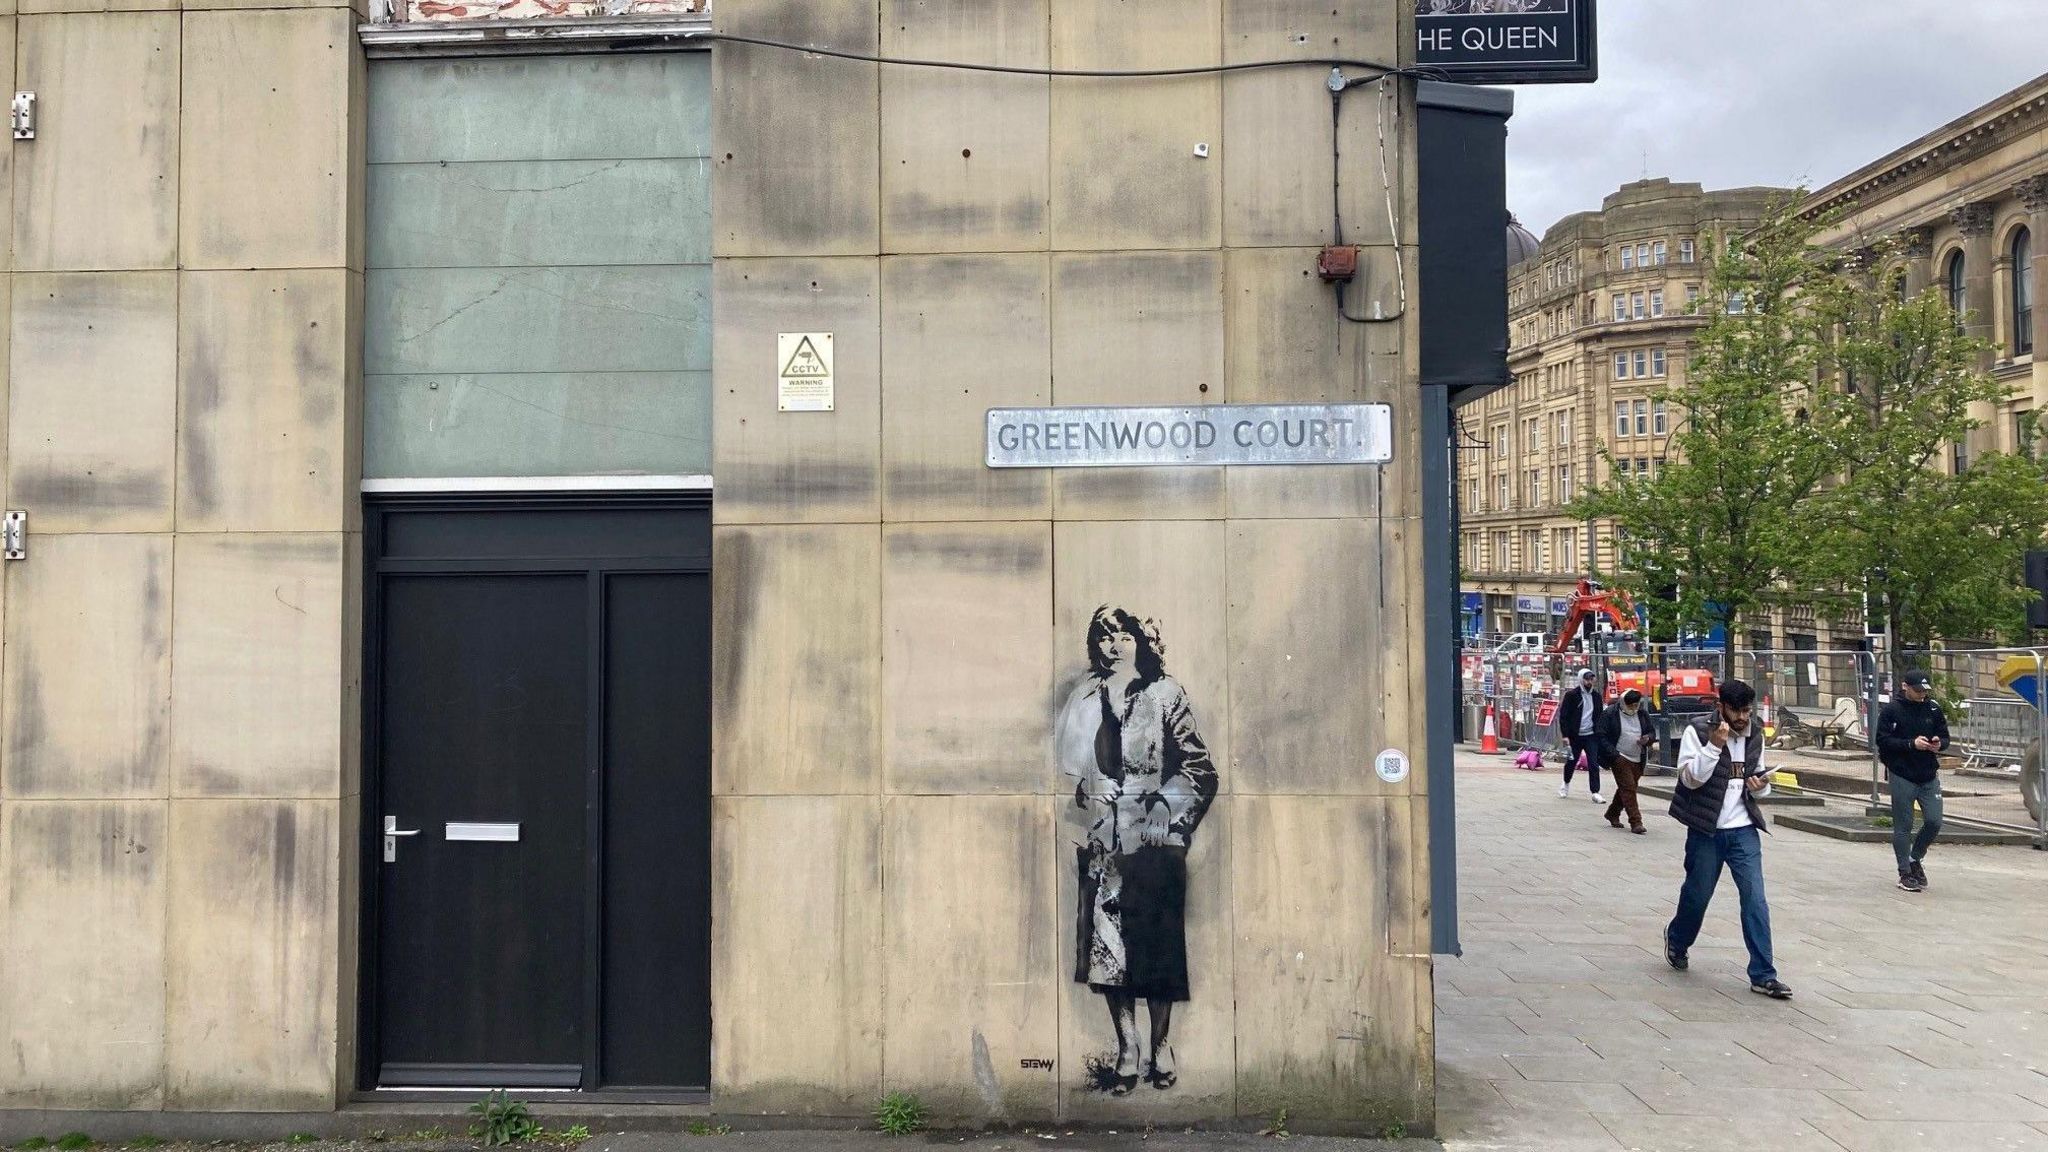 A stenciled artwork of Andrea Dunbar on the side of The Queen pub in Bradford